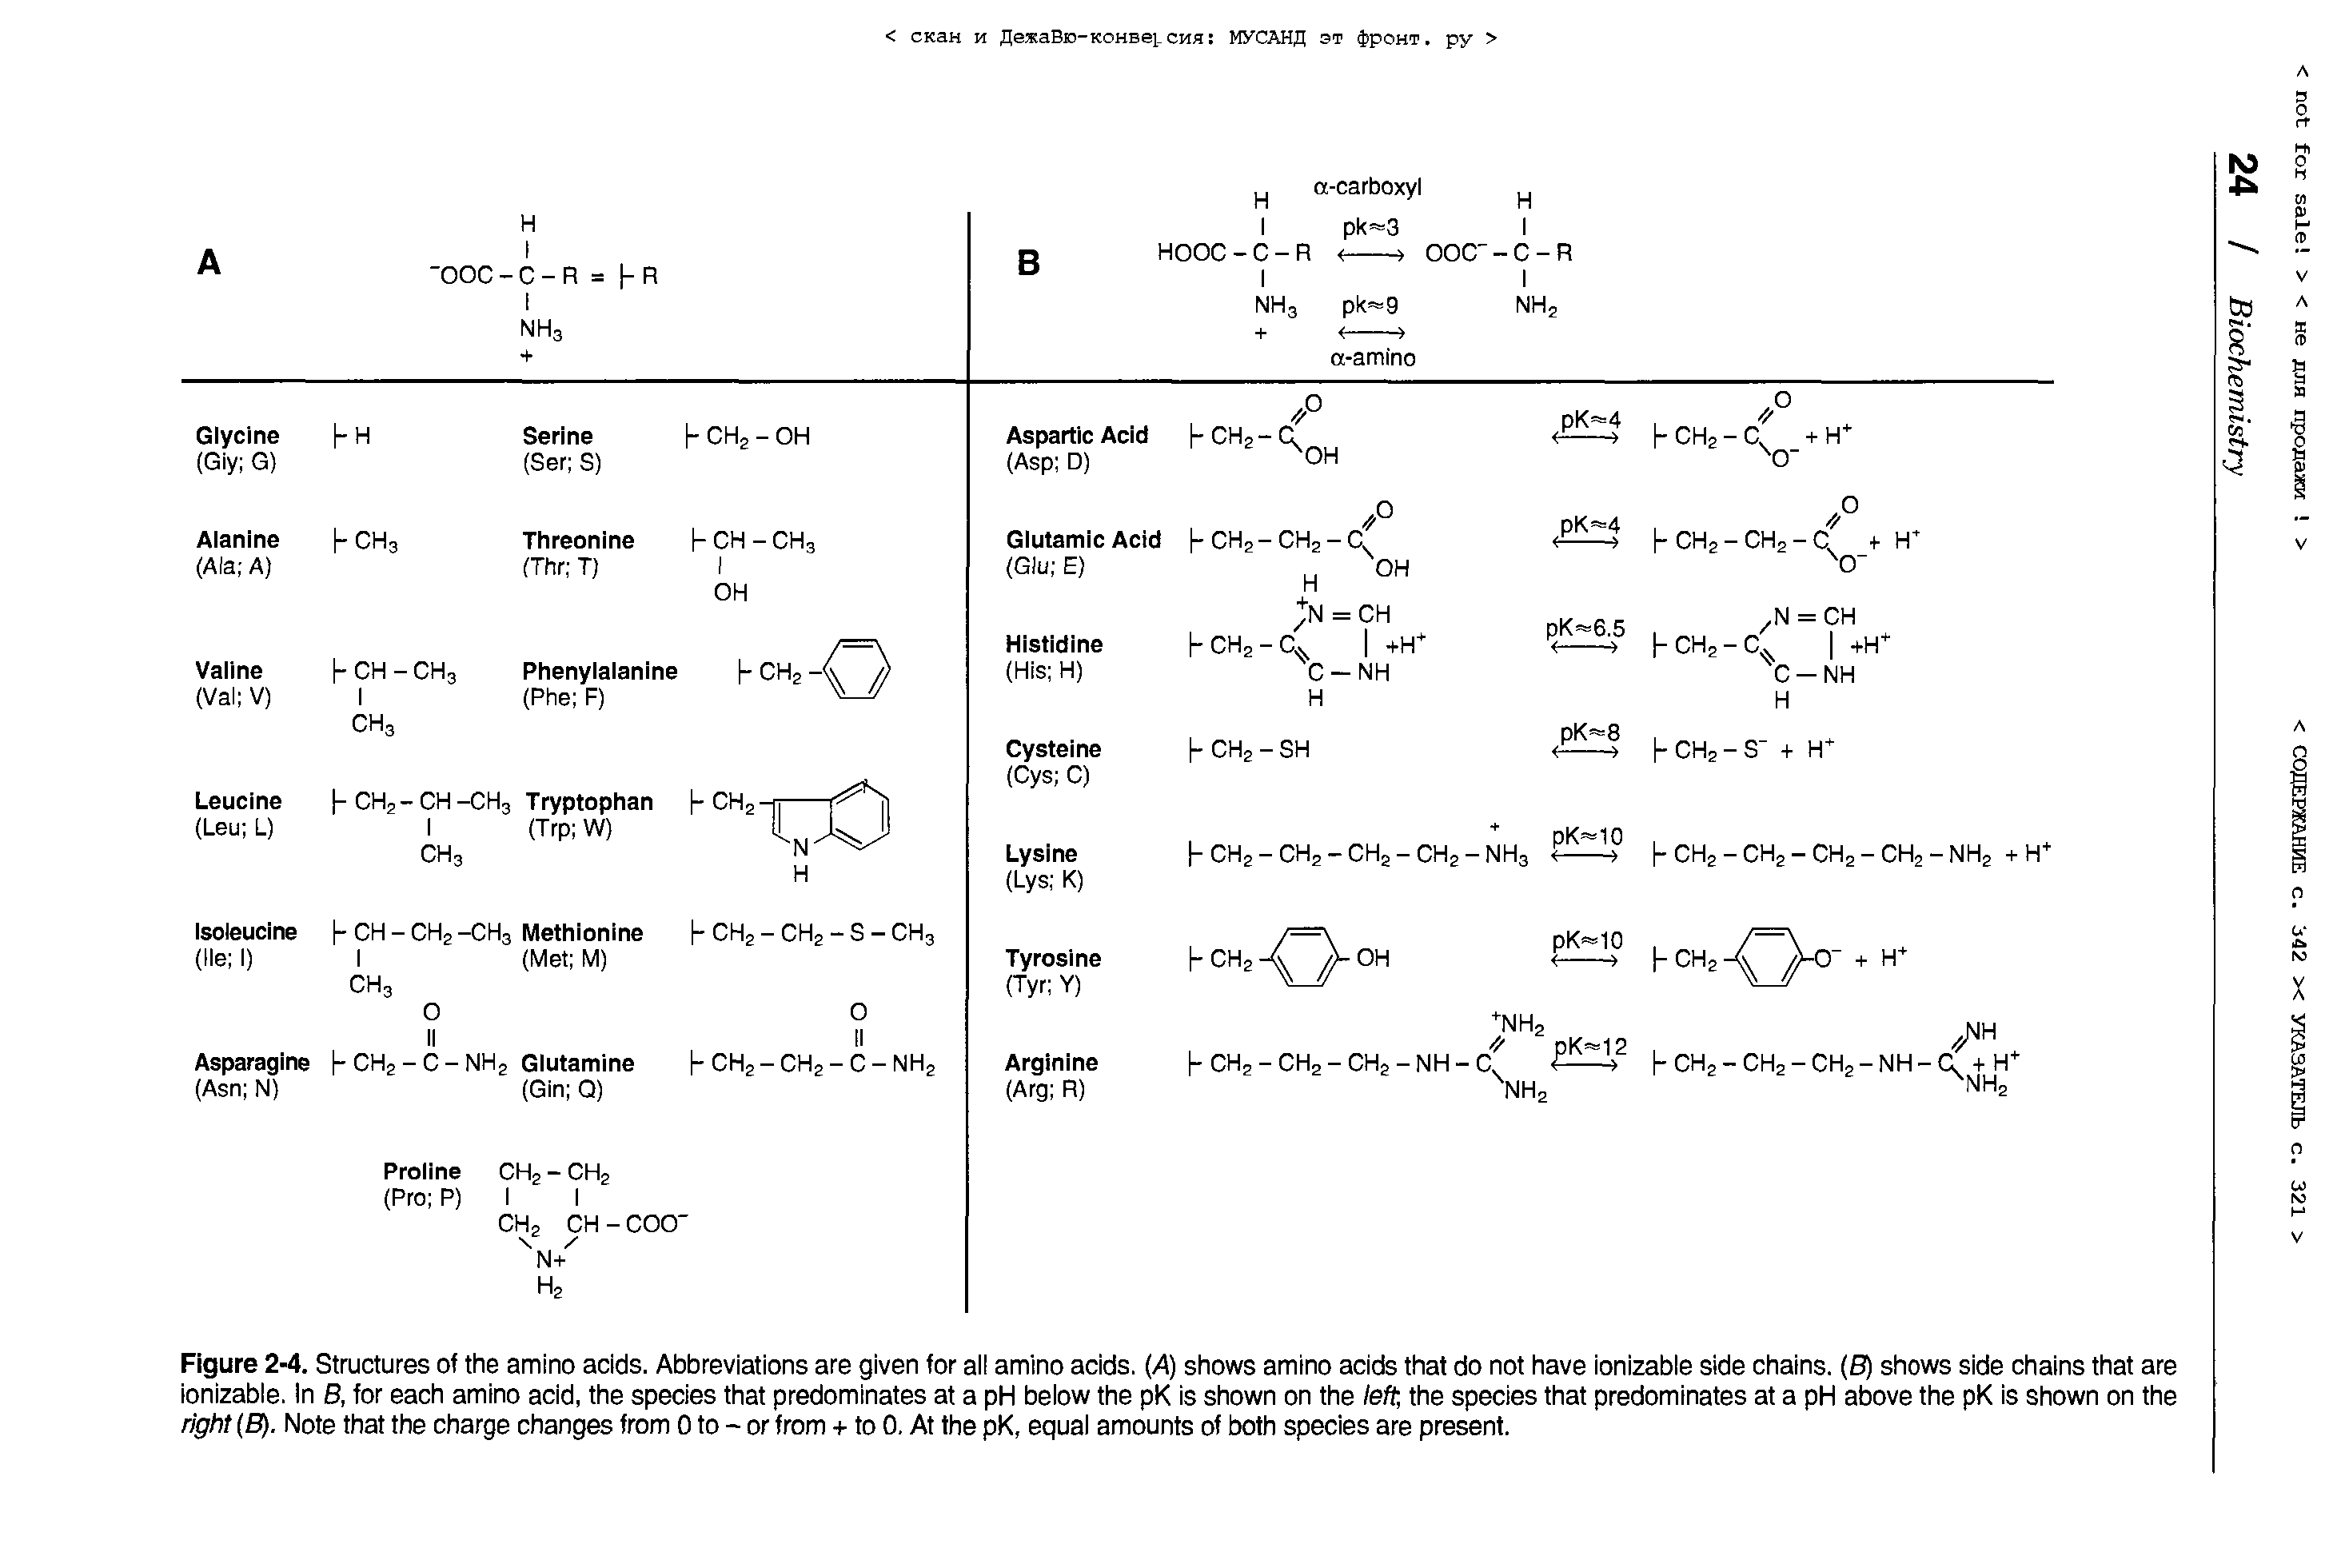 Figure 2-4. Structures of the amino acids. Abbreviations are given for all amino acids. (A) shows amino acids that do not have ionizable side chains. (8) shows side chains that are ionizable. In 8, for each amino acid, the species that predominates at a pH below the pK is shown on the left, the species that predominates at a pH above the pK is shown on the right (8). Note that the charge changes from 0 to - or from + to 0. At the pK, equal amounts of both species are present.